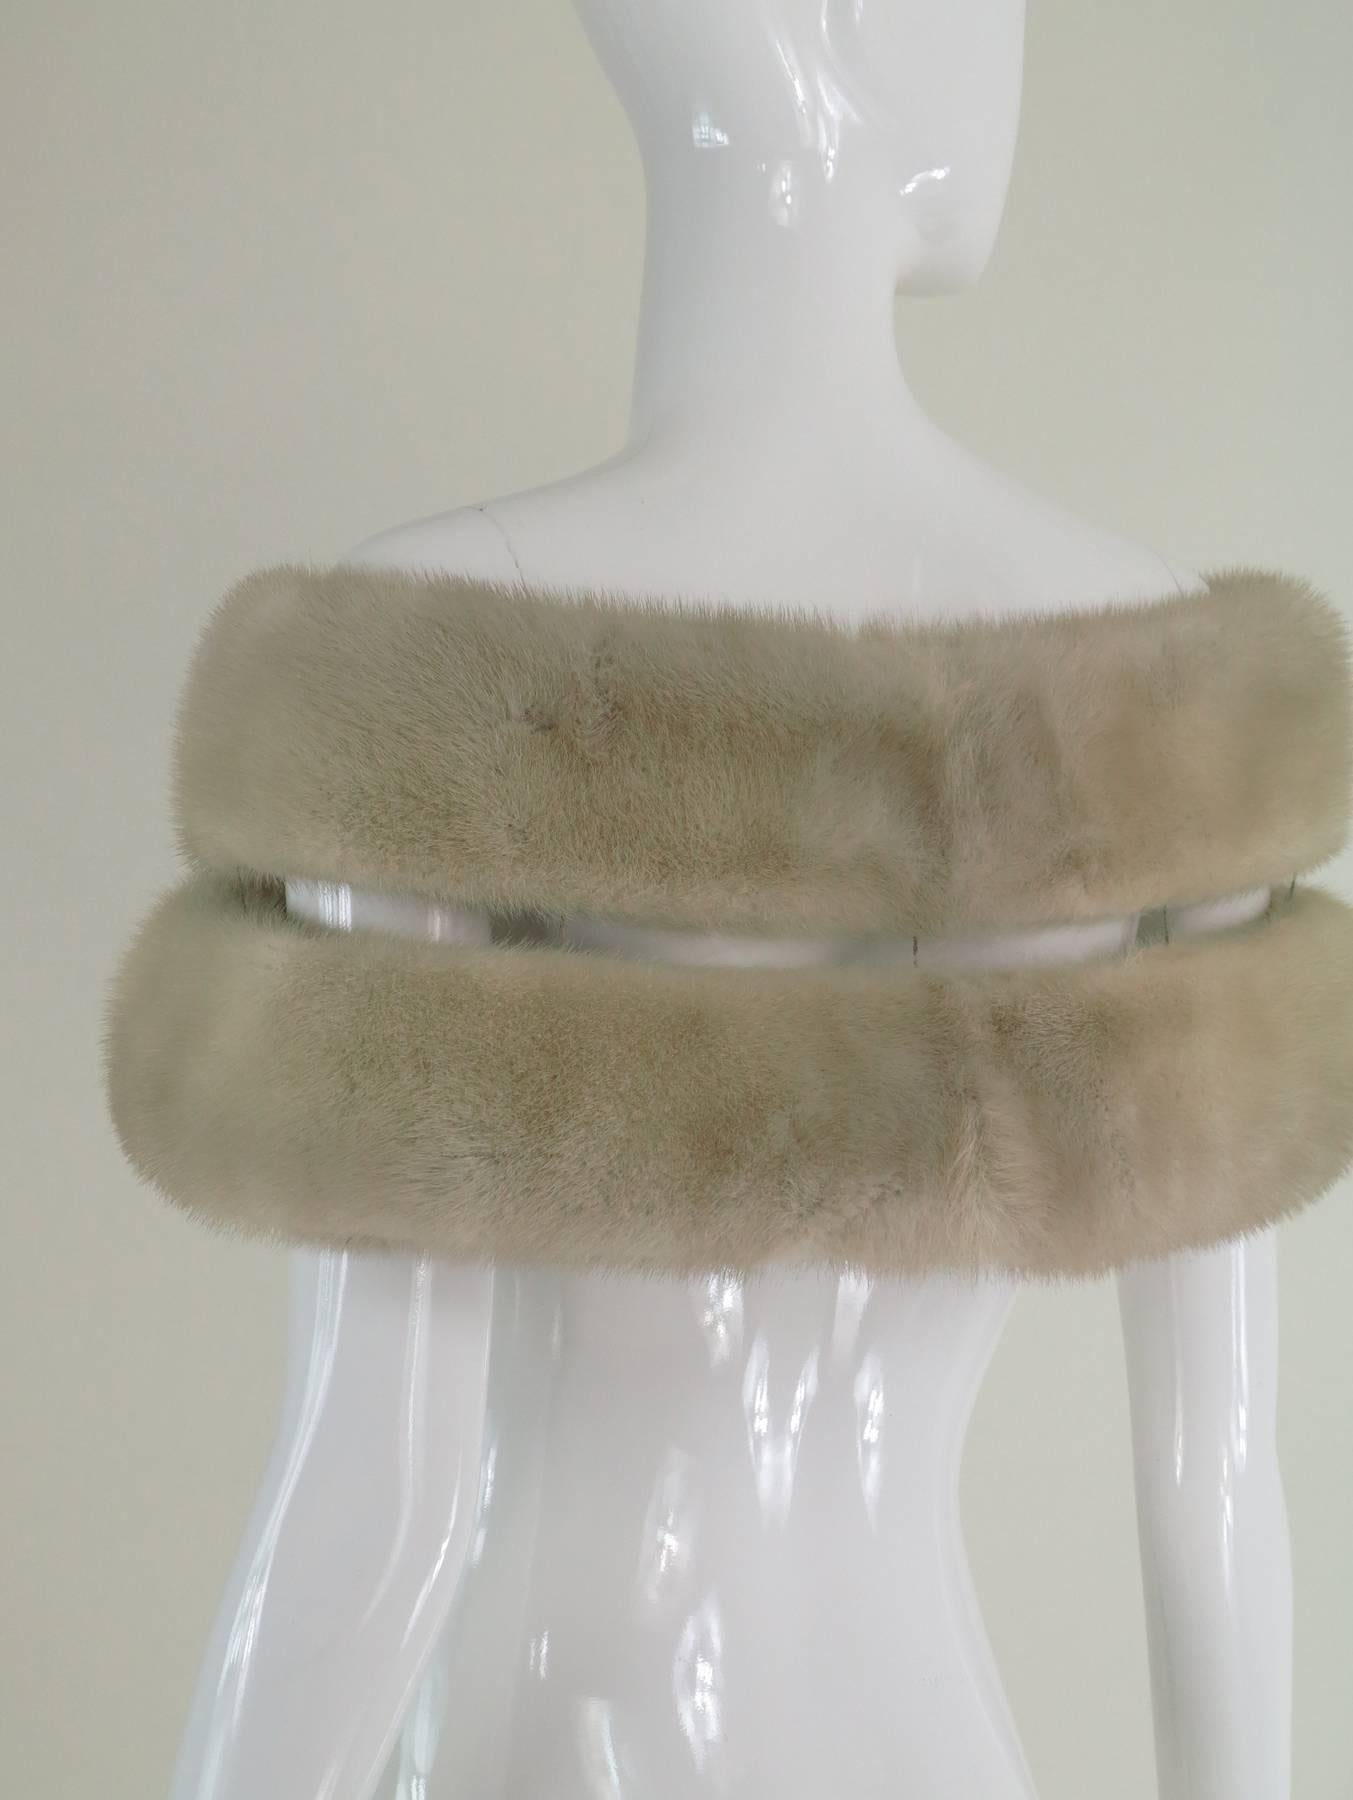  Double mink stole in champagne from the 1950s 1